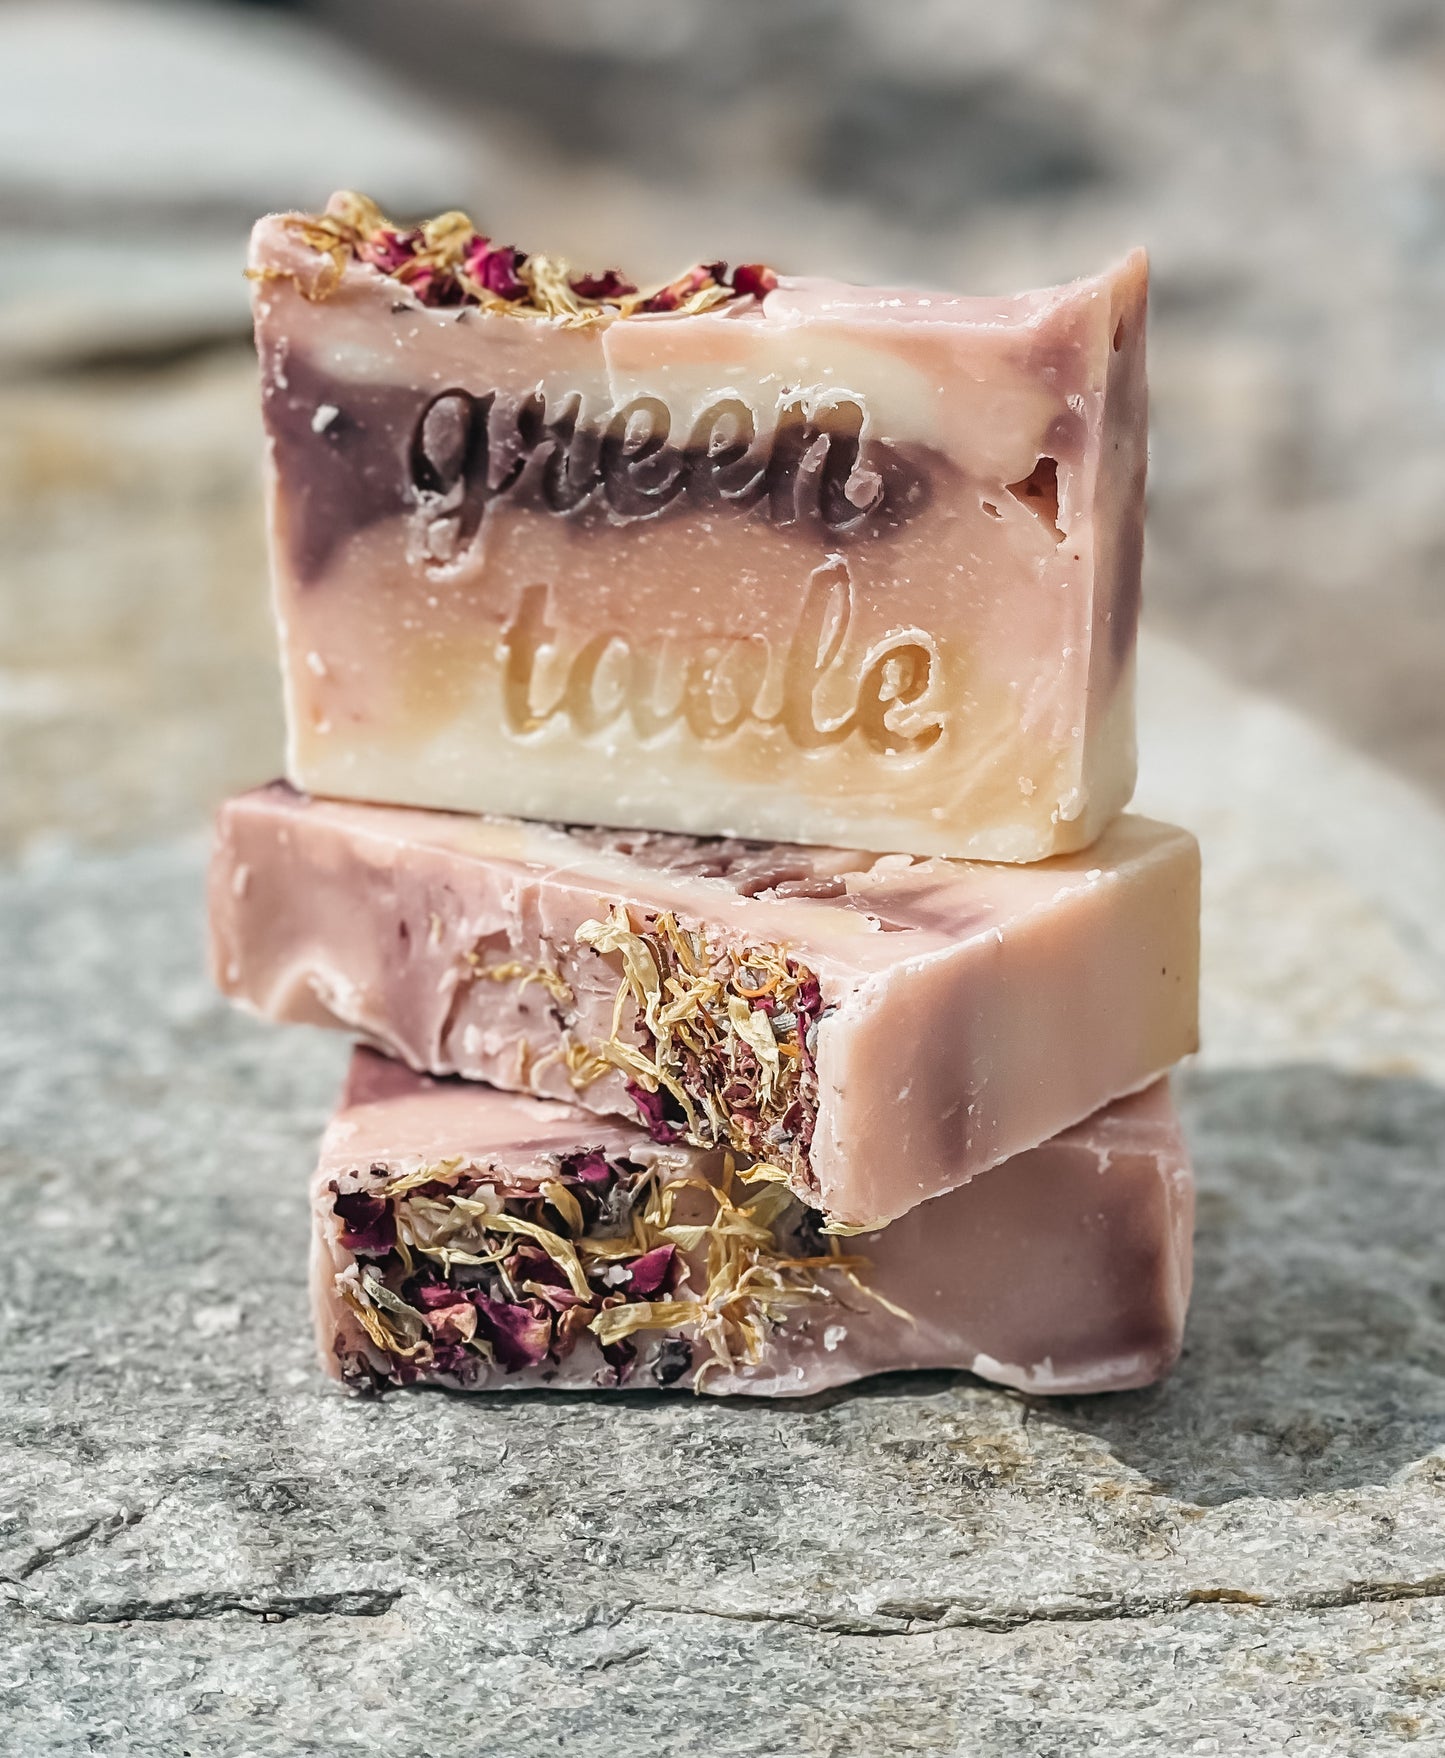 Spring Showers Soap